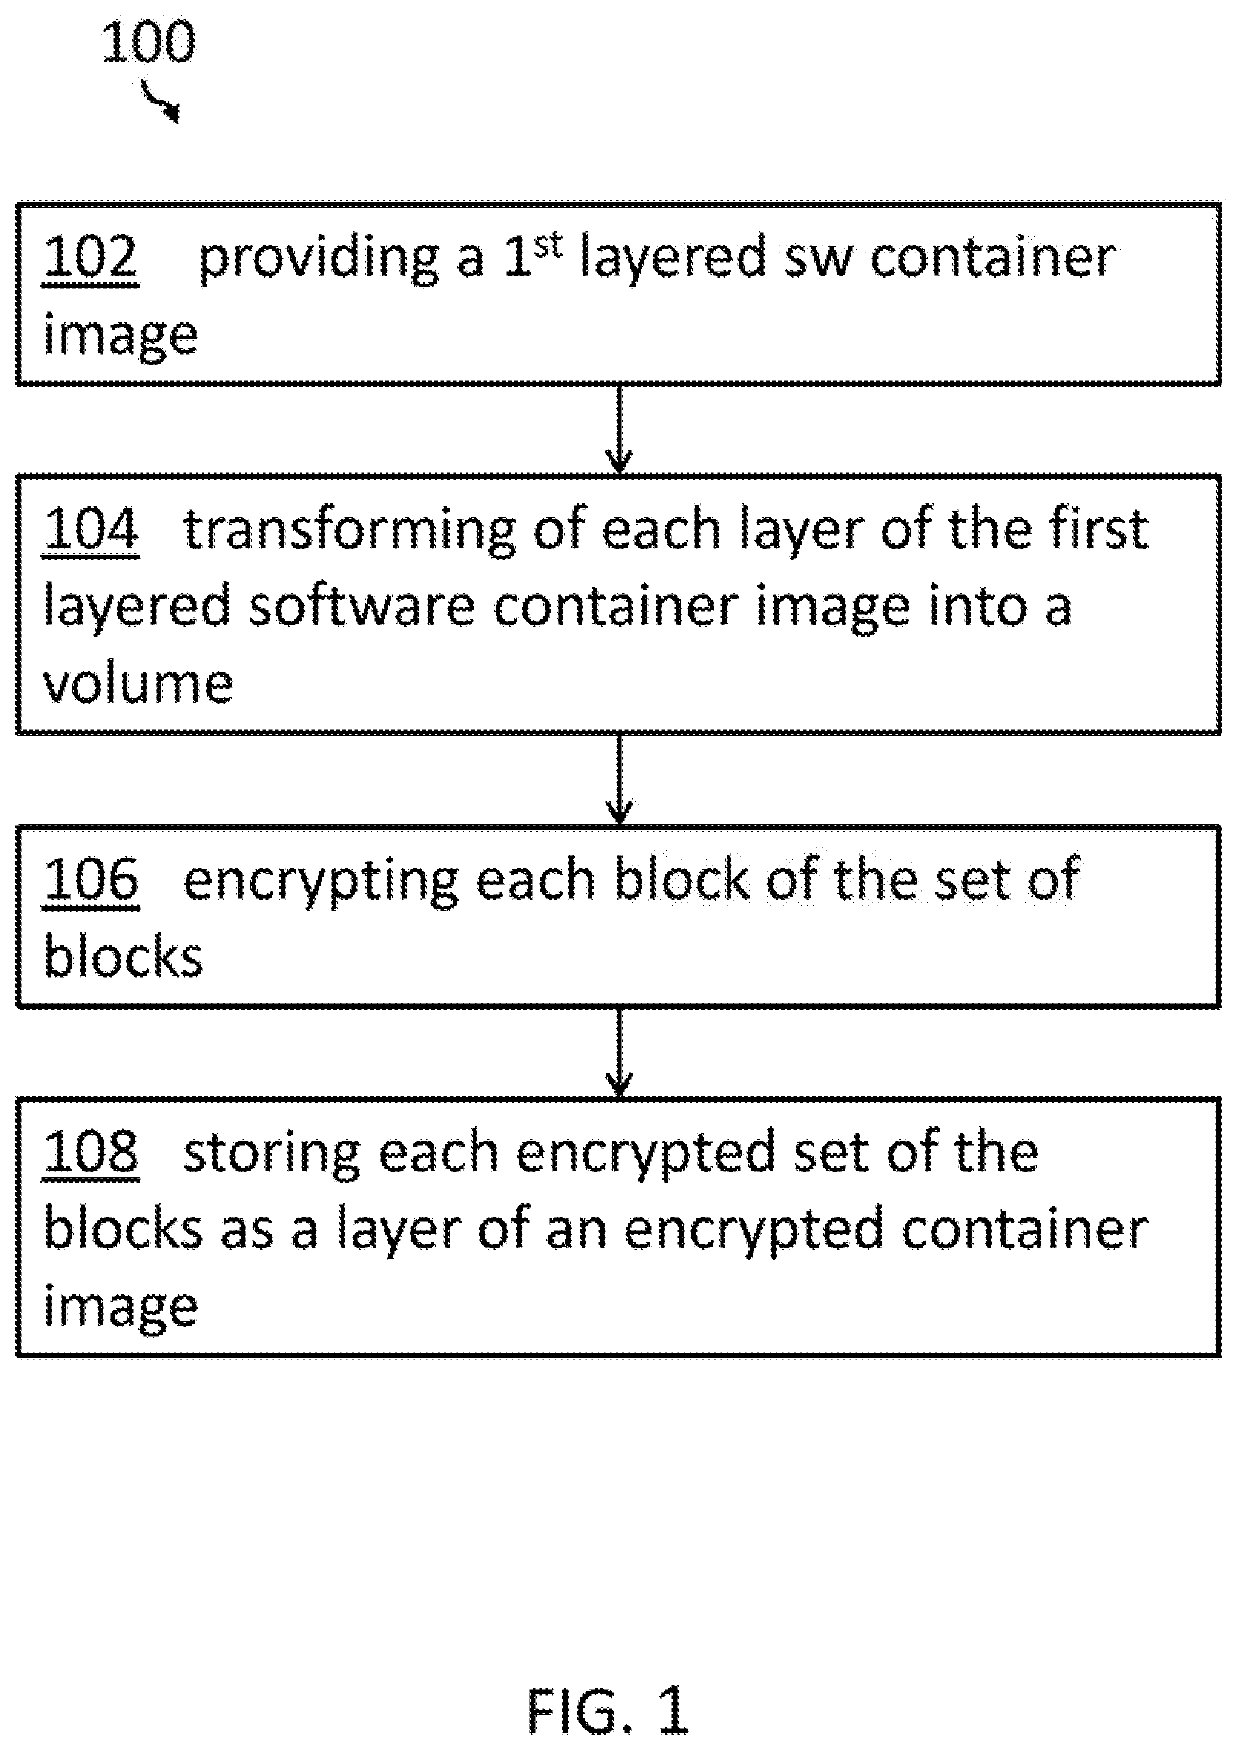 Creation and execution of secure containers